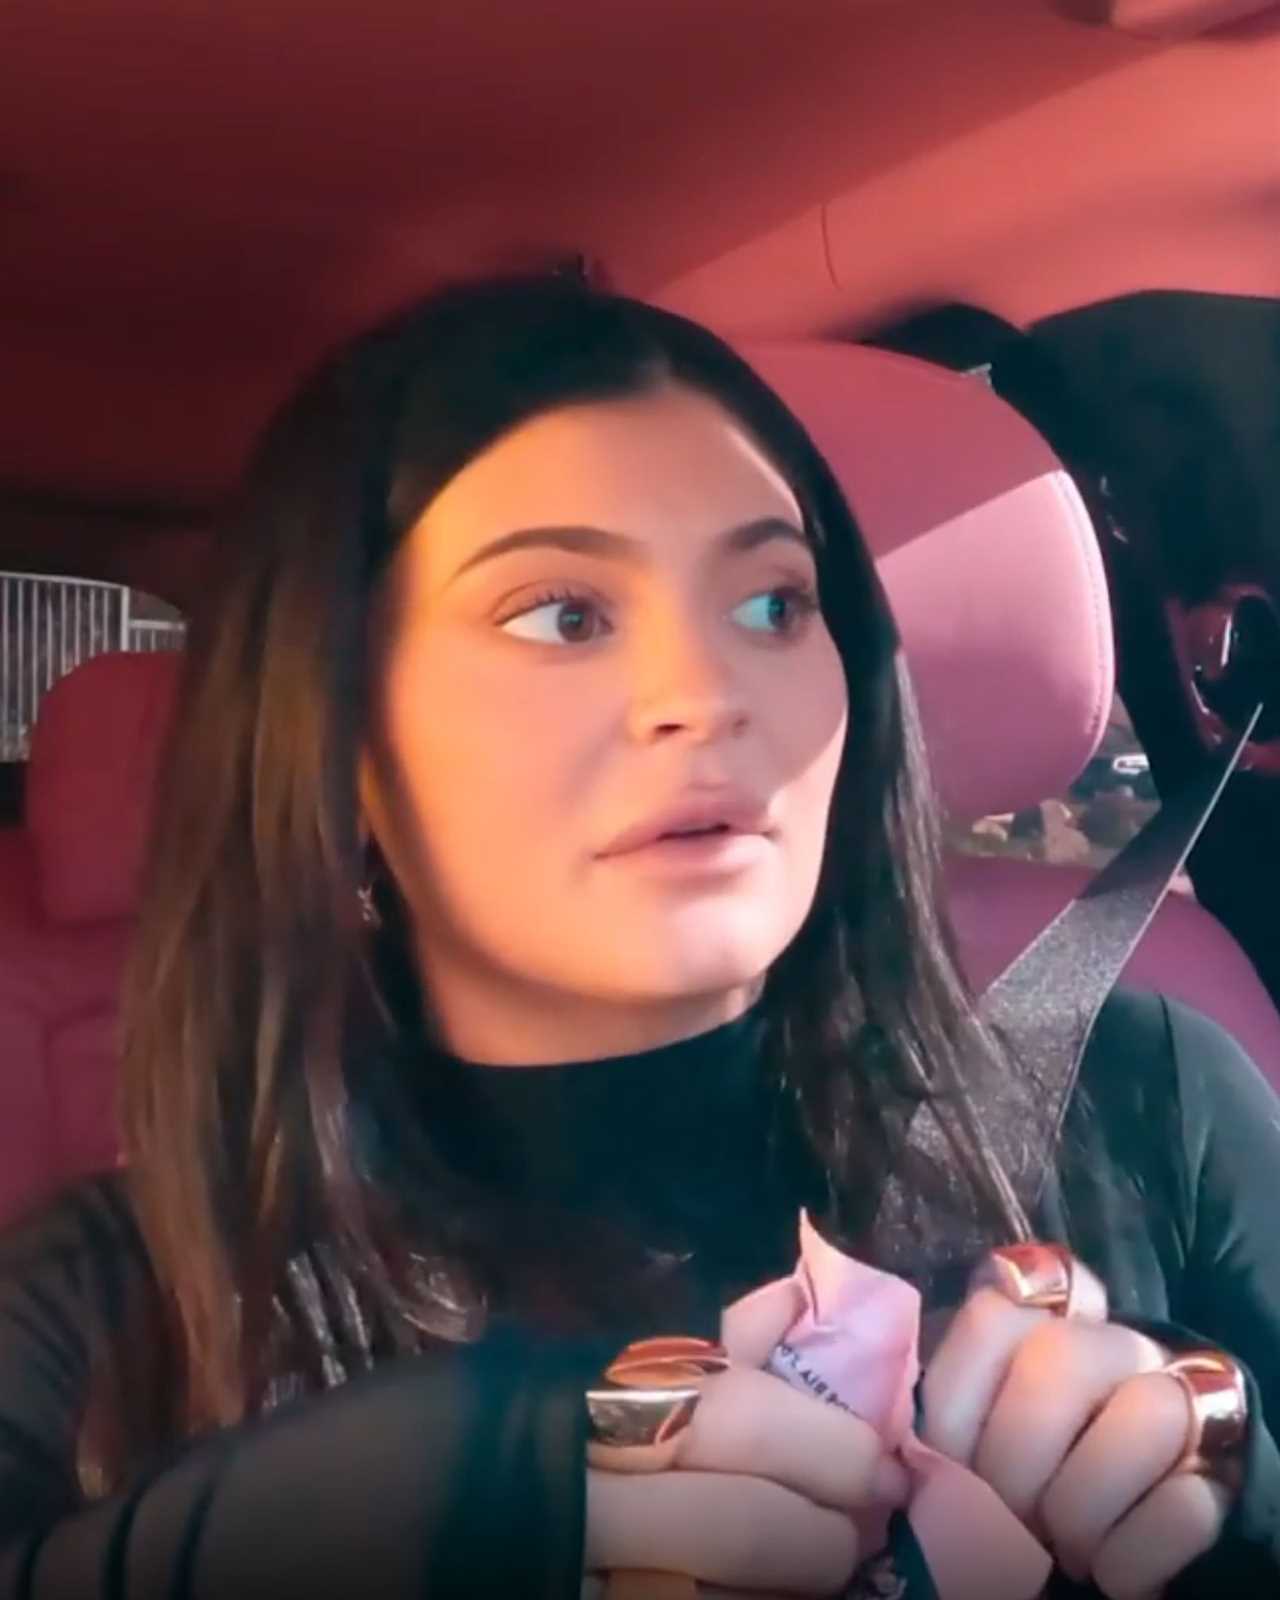 Kylie Jenner ripped for ‘unacceptable’ treatment of niece Chicago, 5, in background of new TikTok at Disneyland